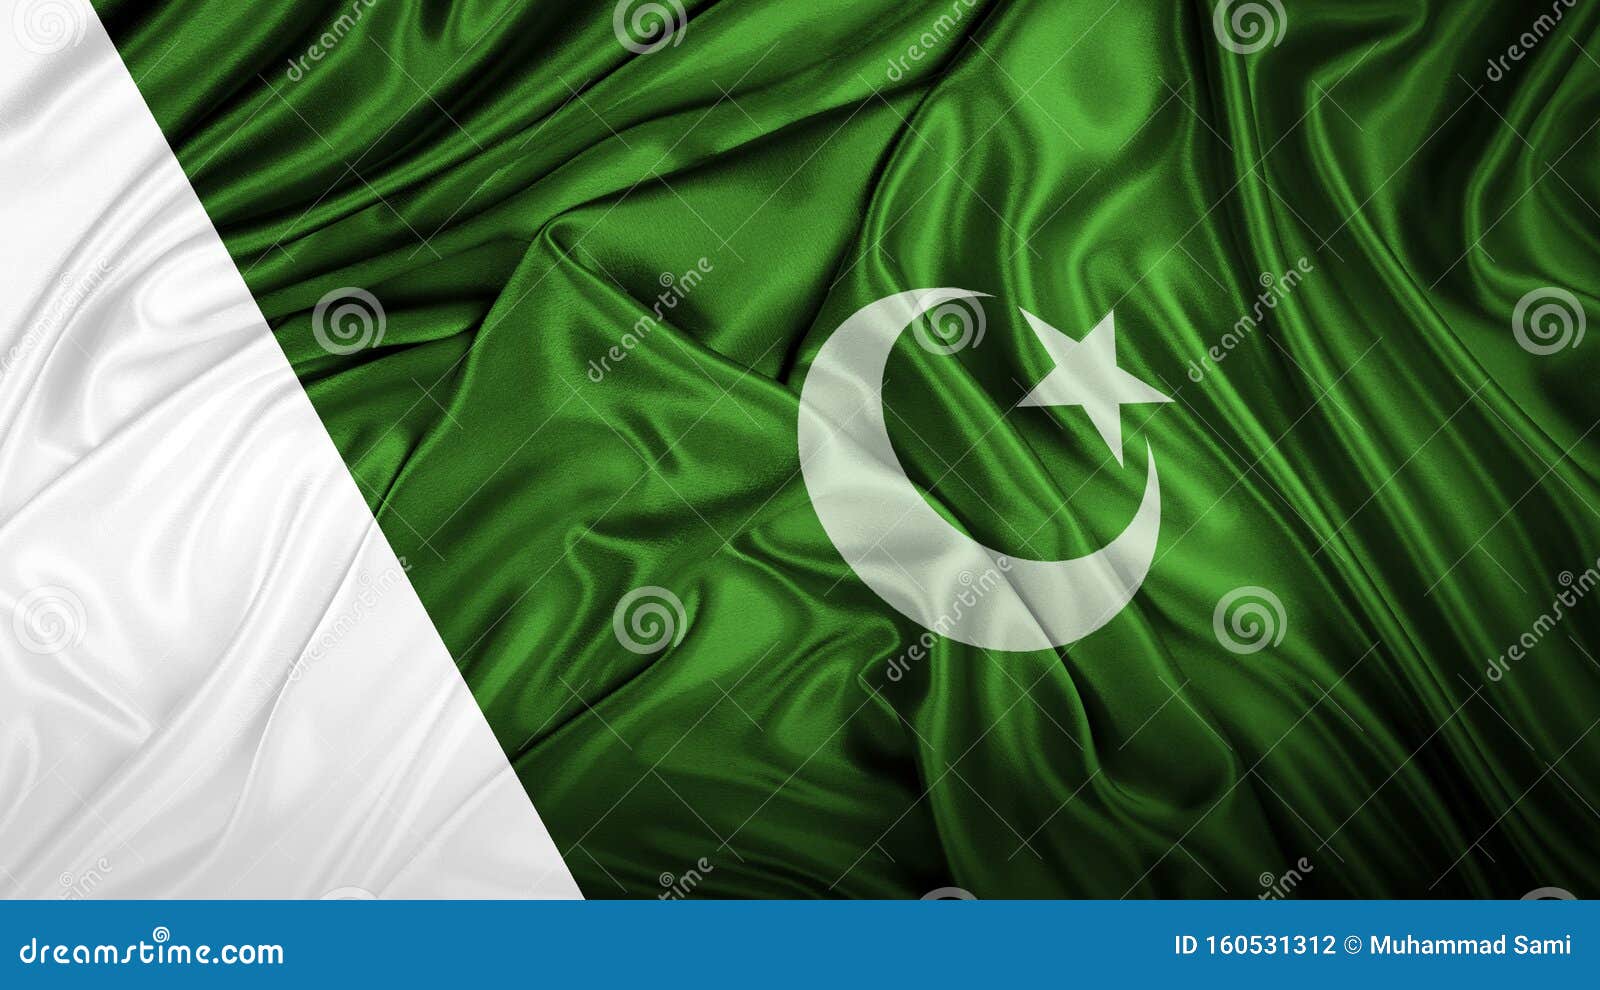 realistic flag of pakistan on the wavy surface of fabric